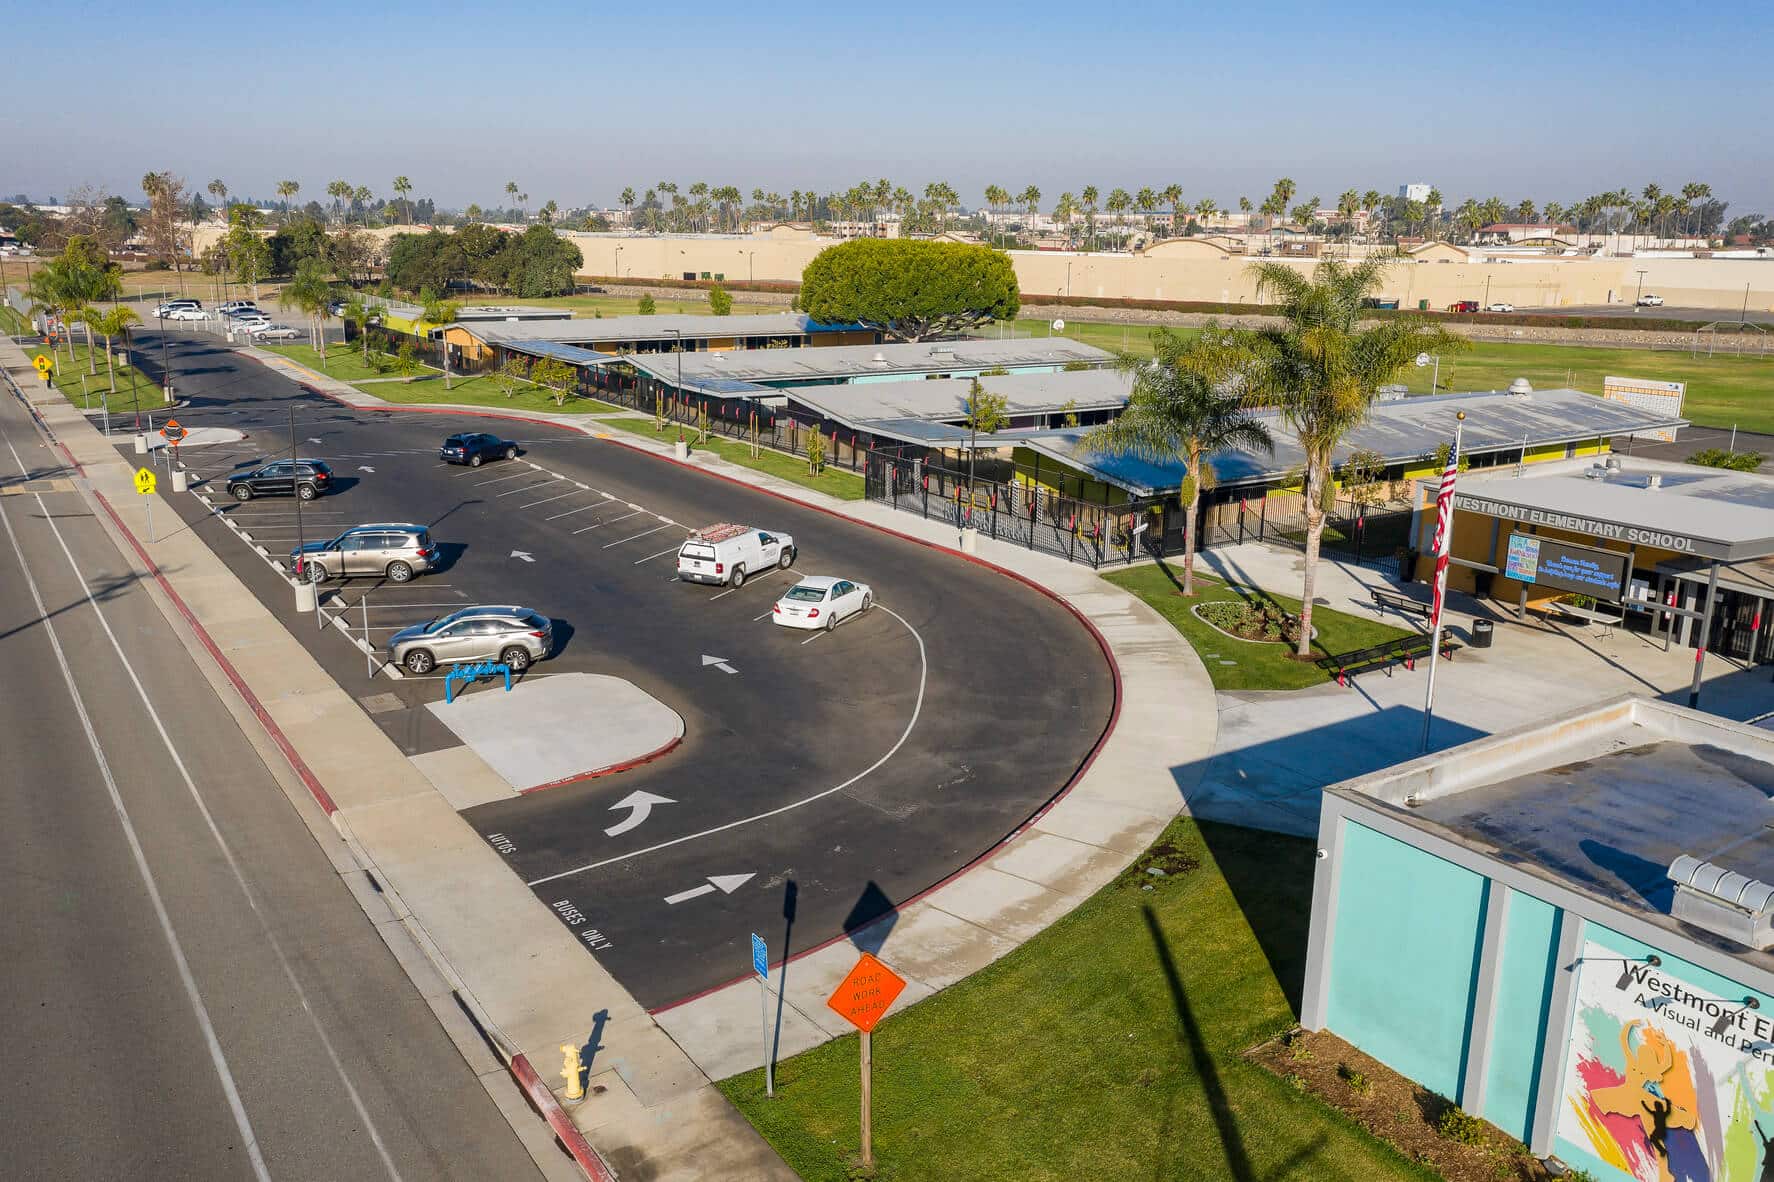 Aerial view of the Westmont Elementary School turn in and parking lot